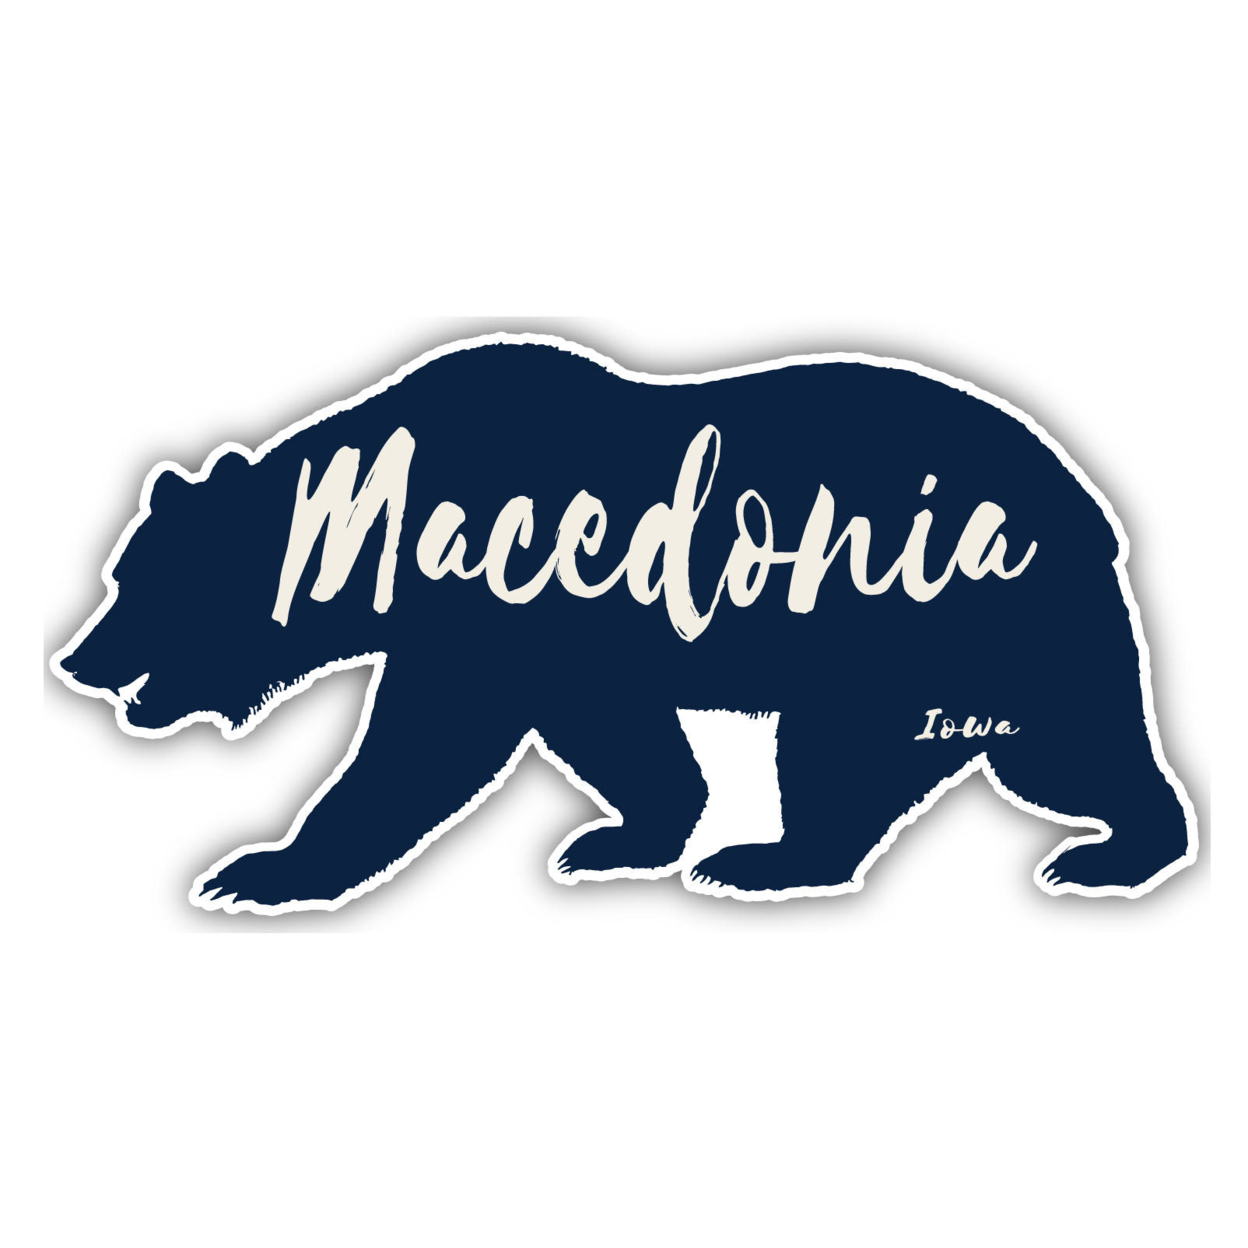 Macedonia Iowa Souvenir Decorative Stickers (Choose Theme And Size) - 2-Inch, Great Outdoors